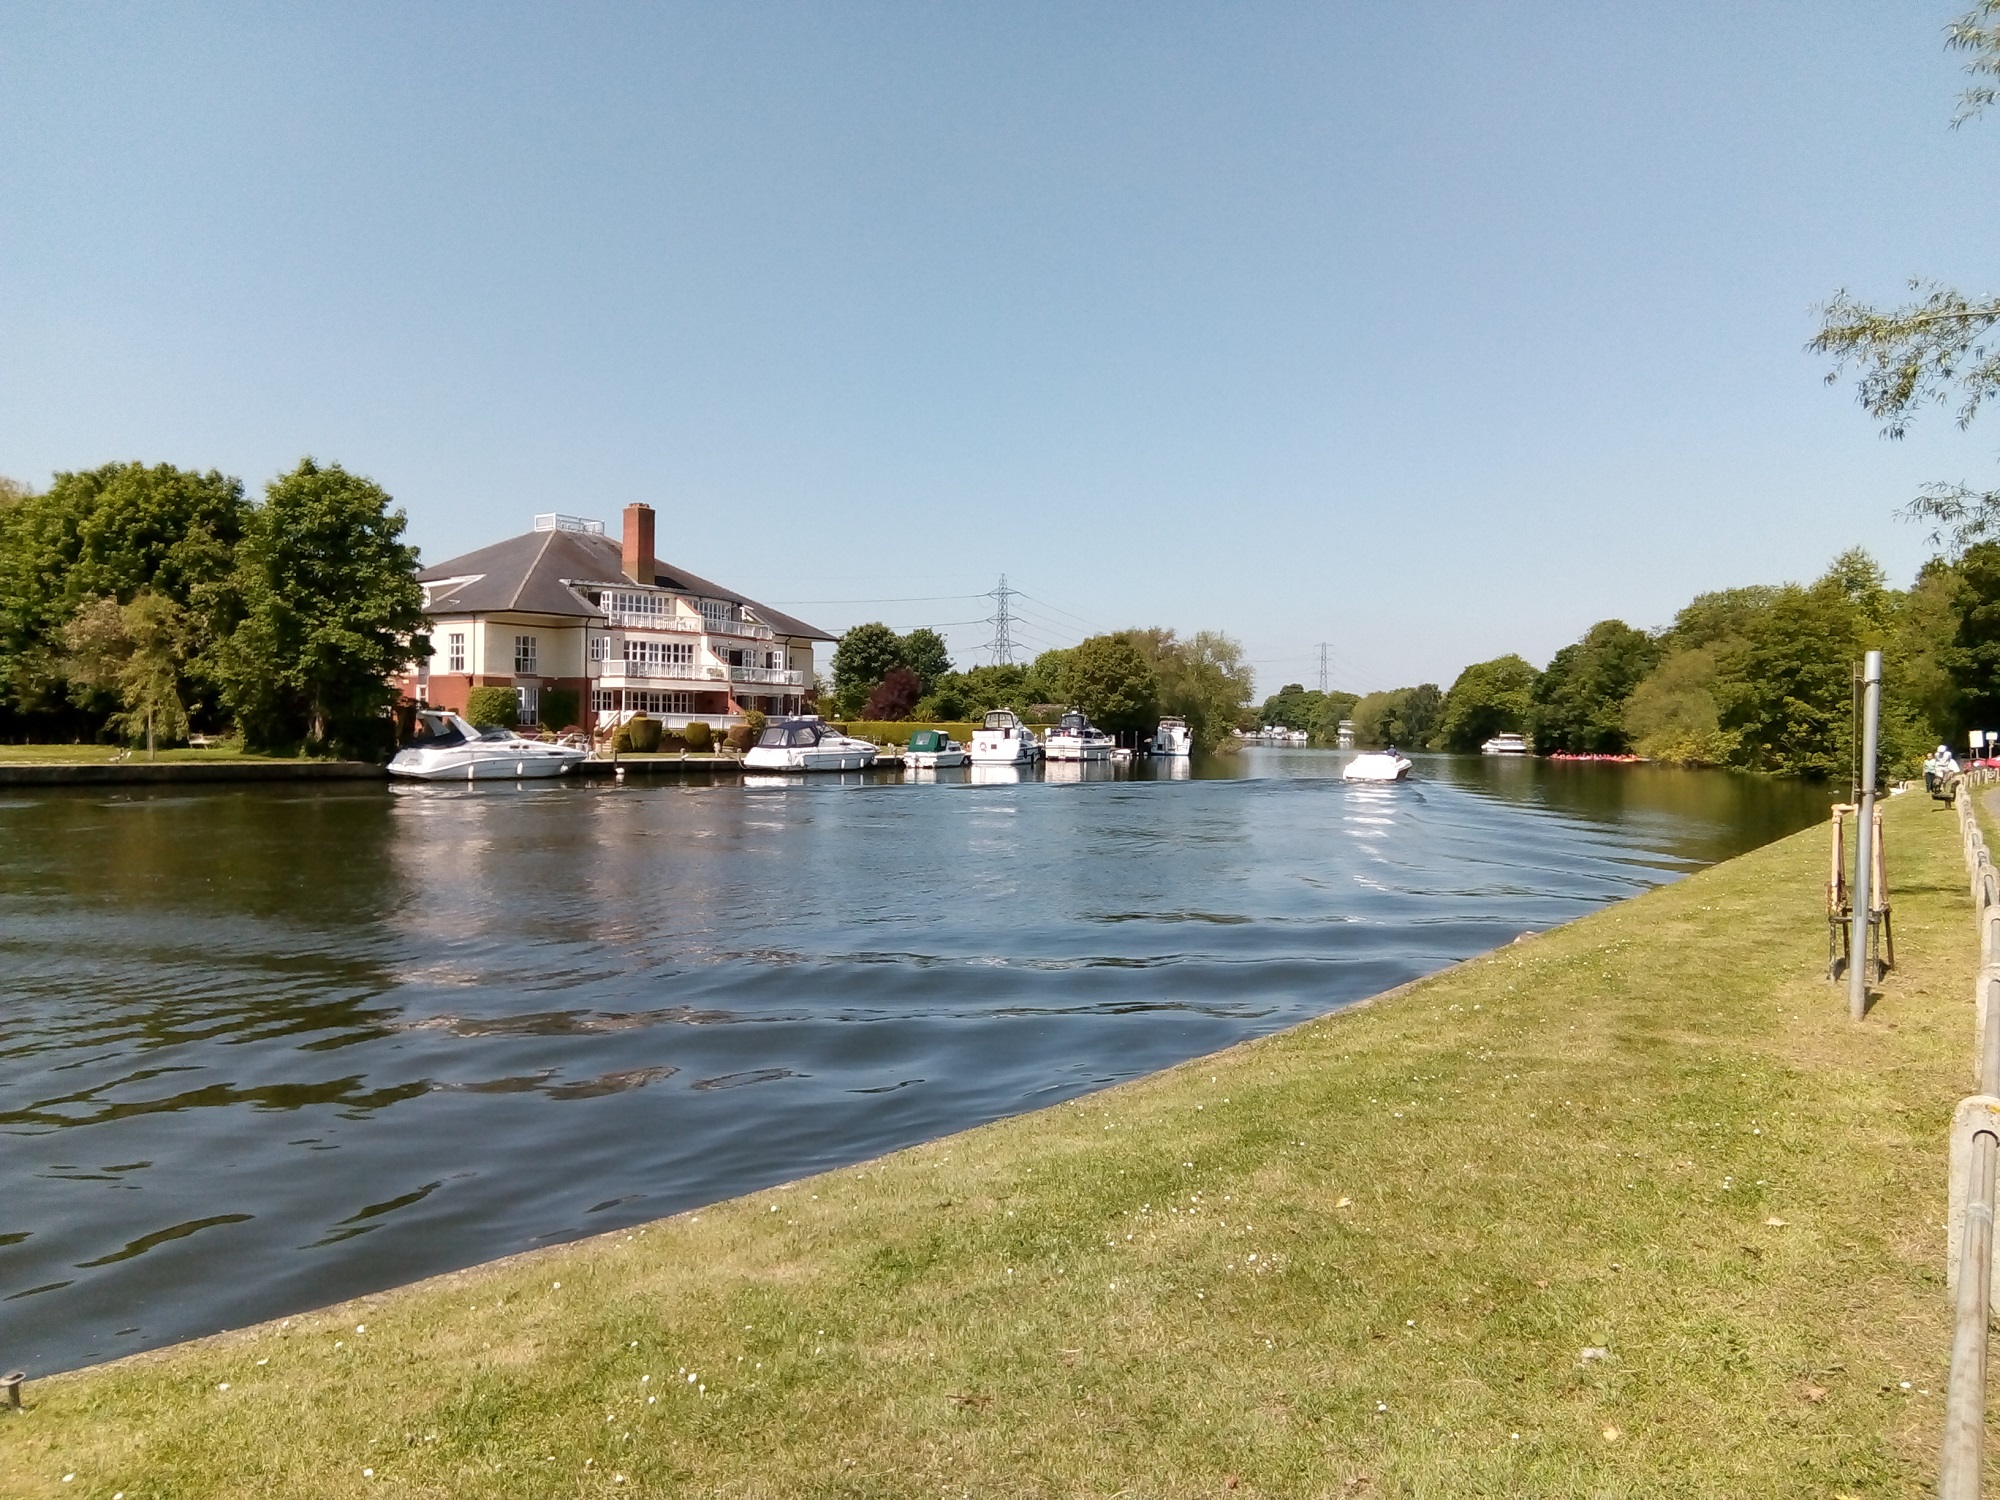 Dockett Moorings viewed from across the Thames near Shepperton on a sunny summer day, while a boat cruises upstream.